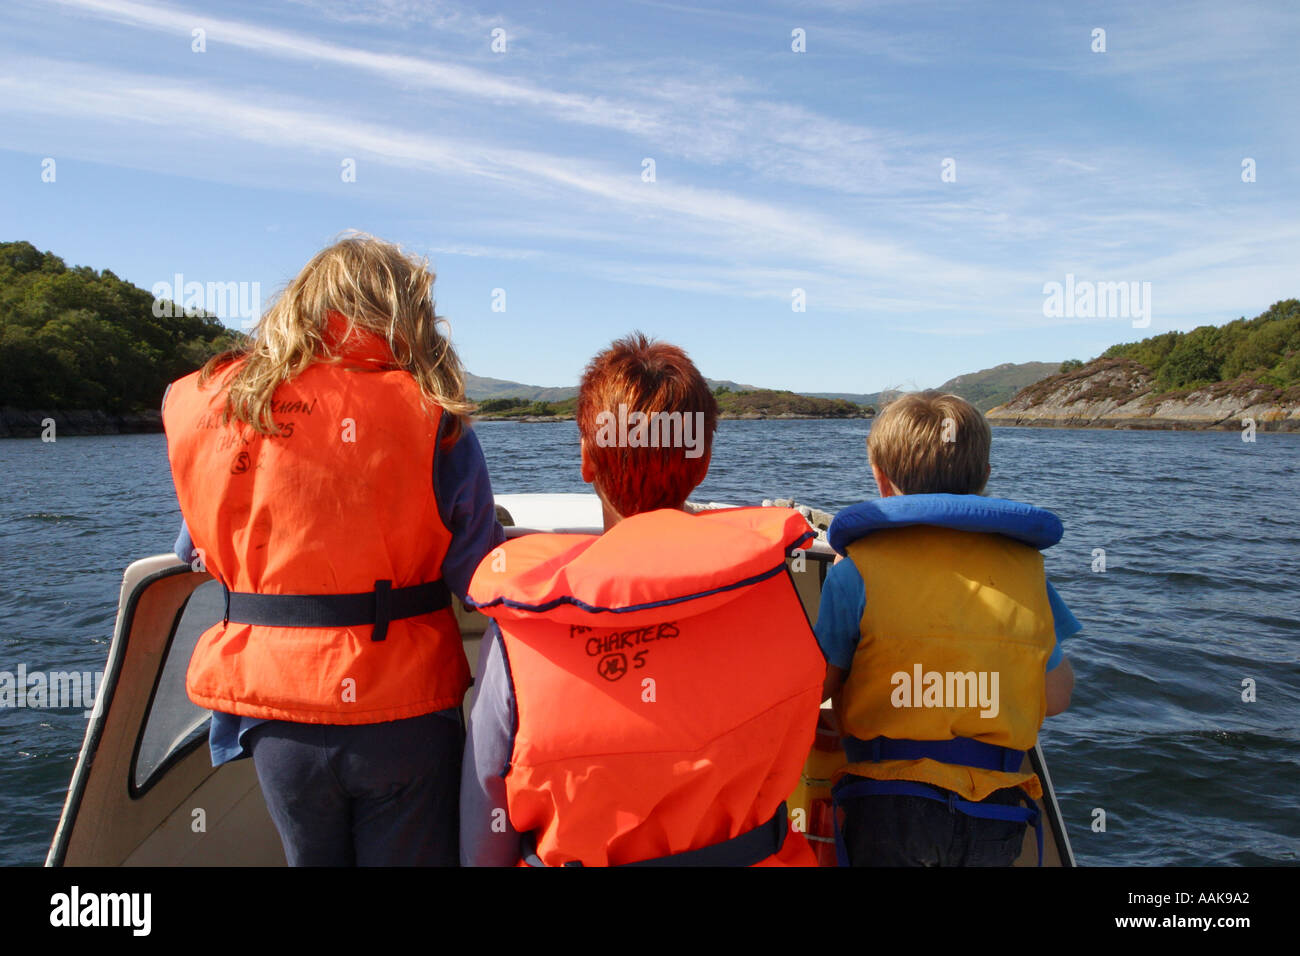 Family boating on a motor boat on a Scottish Loch Sunart in summer wearing safety gear Stock Photo